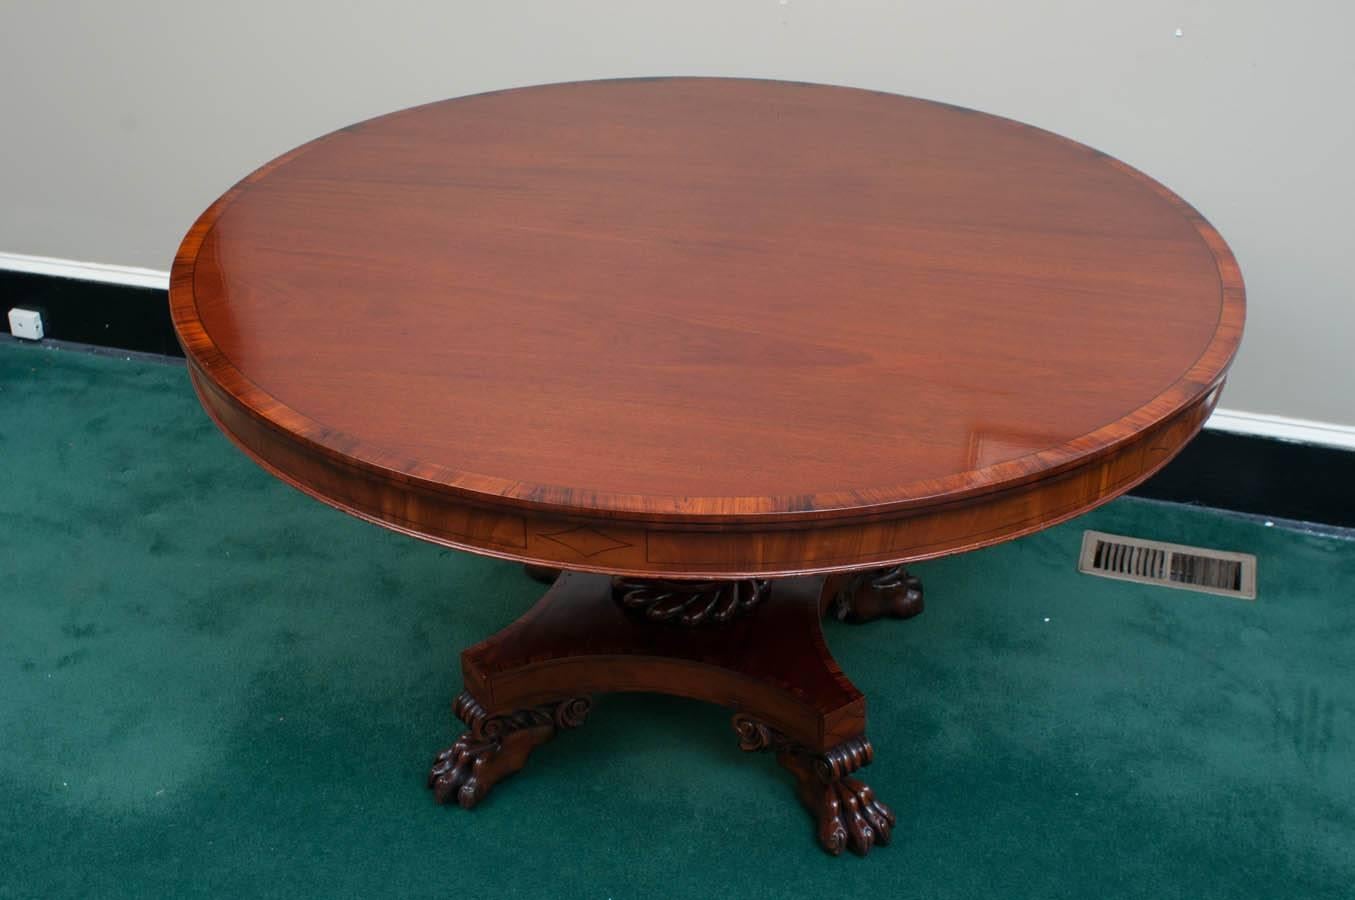 Mahogany with mahogany crossbanding and ebony line inlay, excellent carved feet and base, custom table pads included.